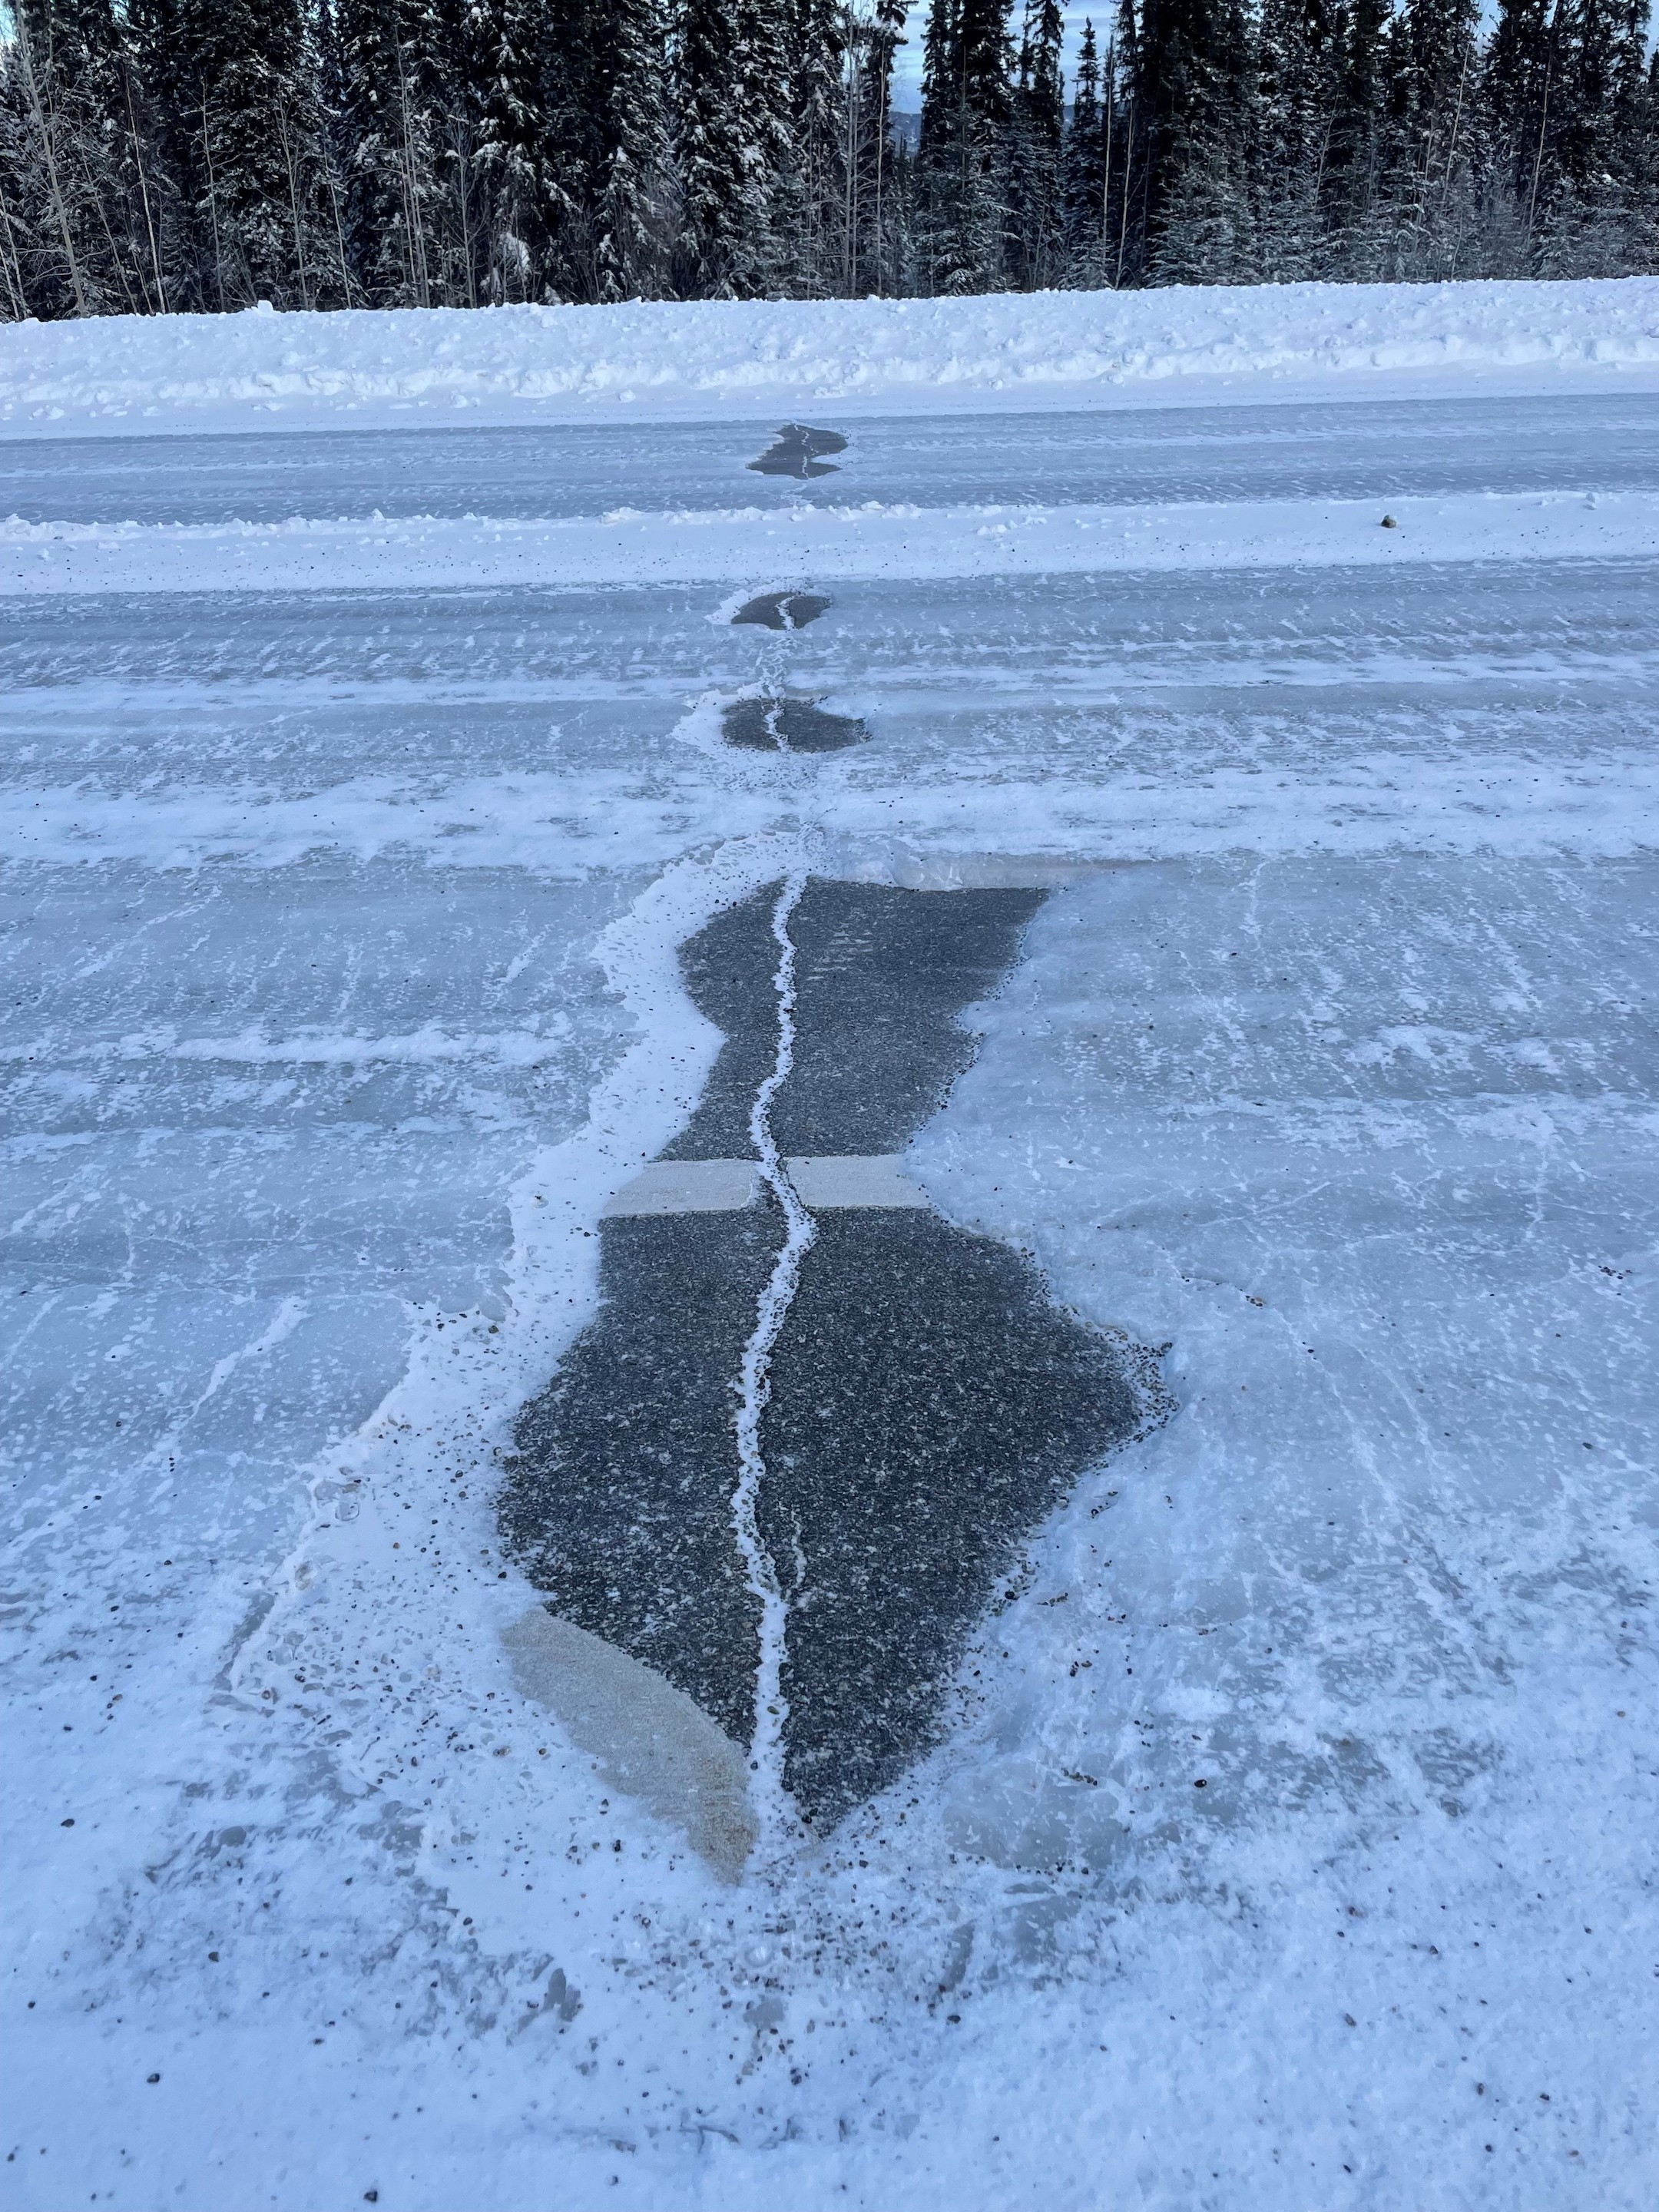 A crack in a snowy road is free of ice